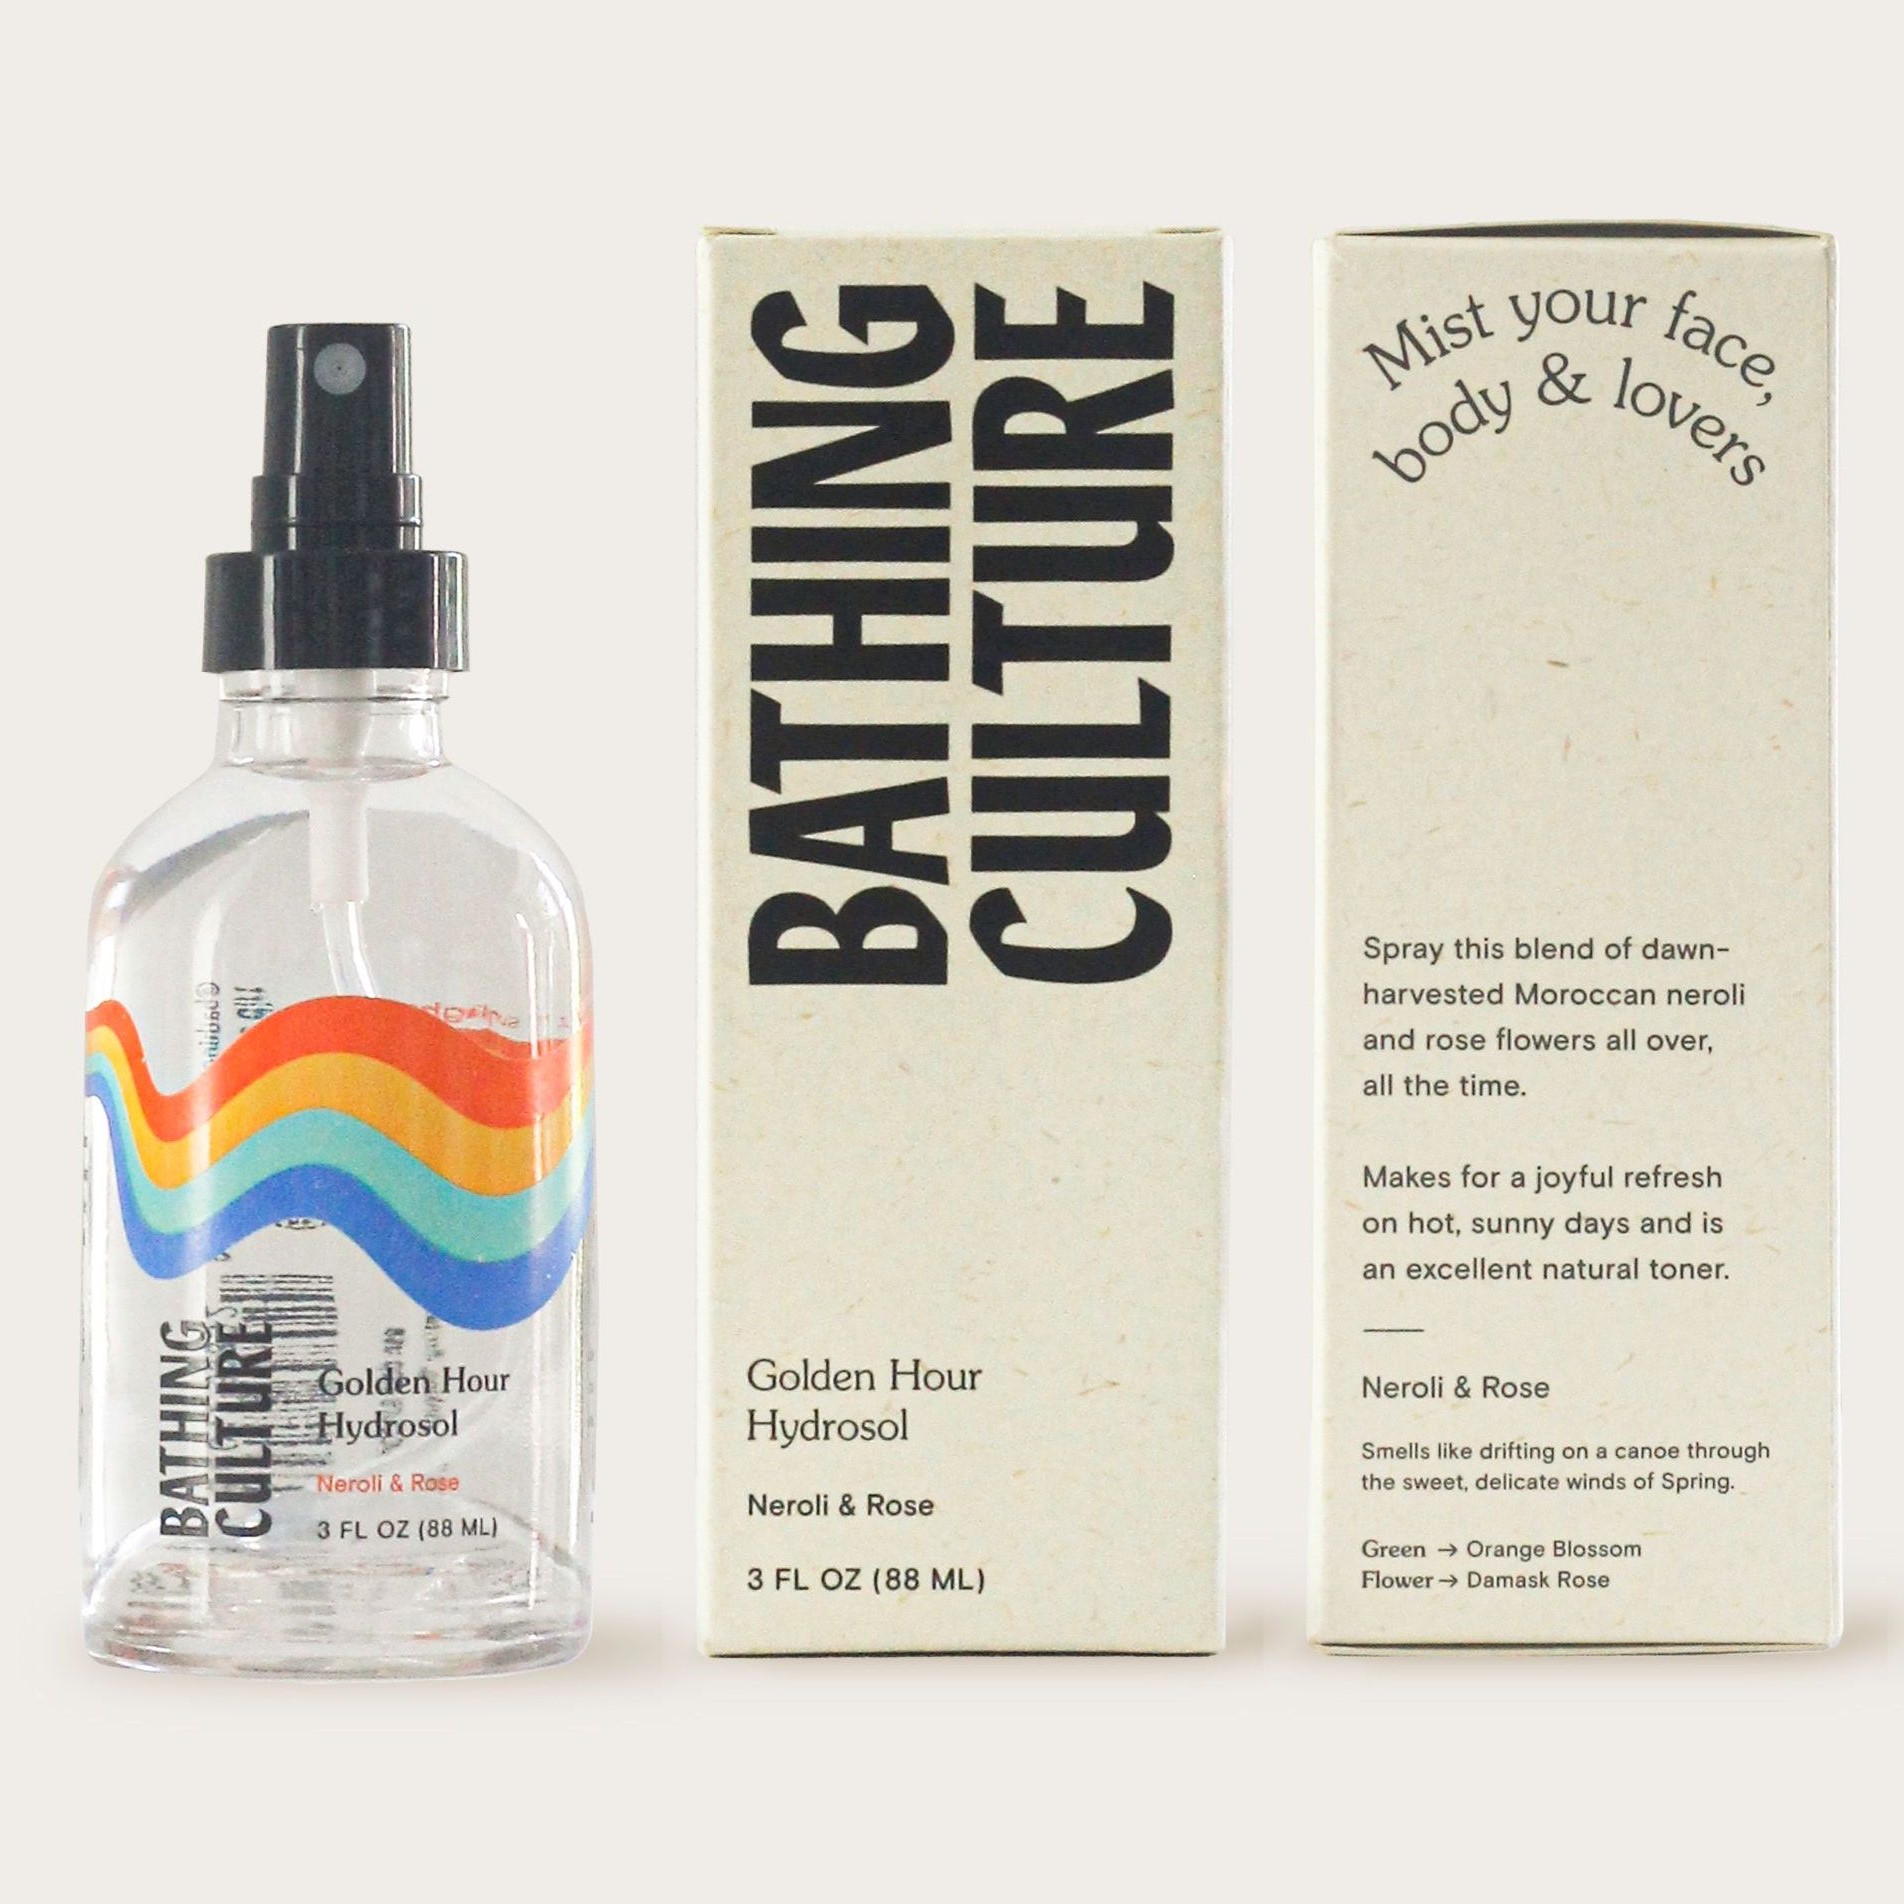 Bathing culture bottle and boxes